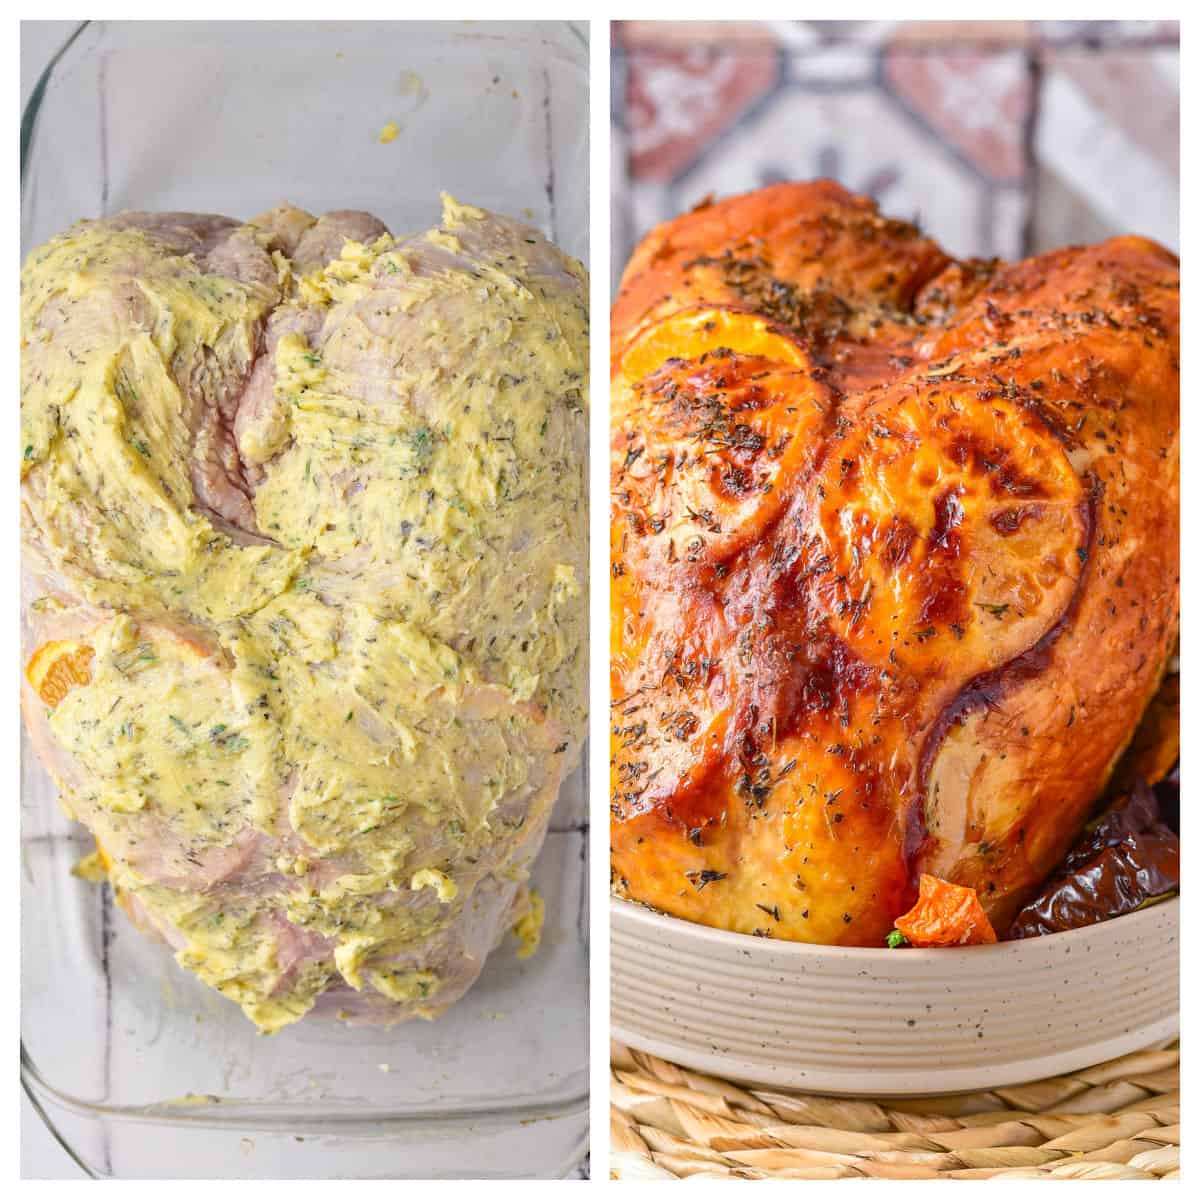 Rubbing butter on the outside of the turkey breast, and a cooked turkey breast.